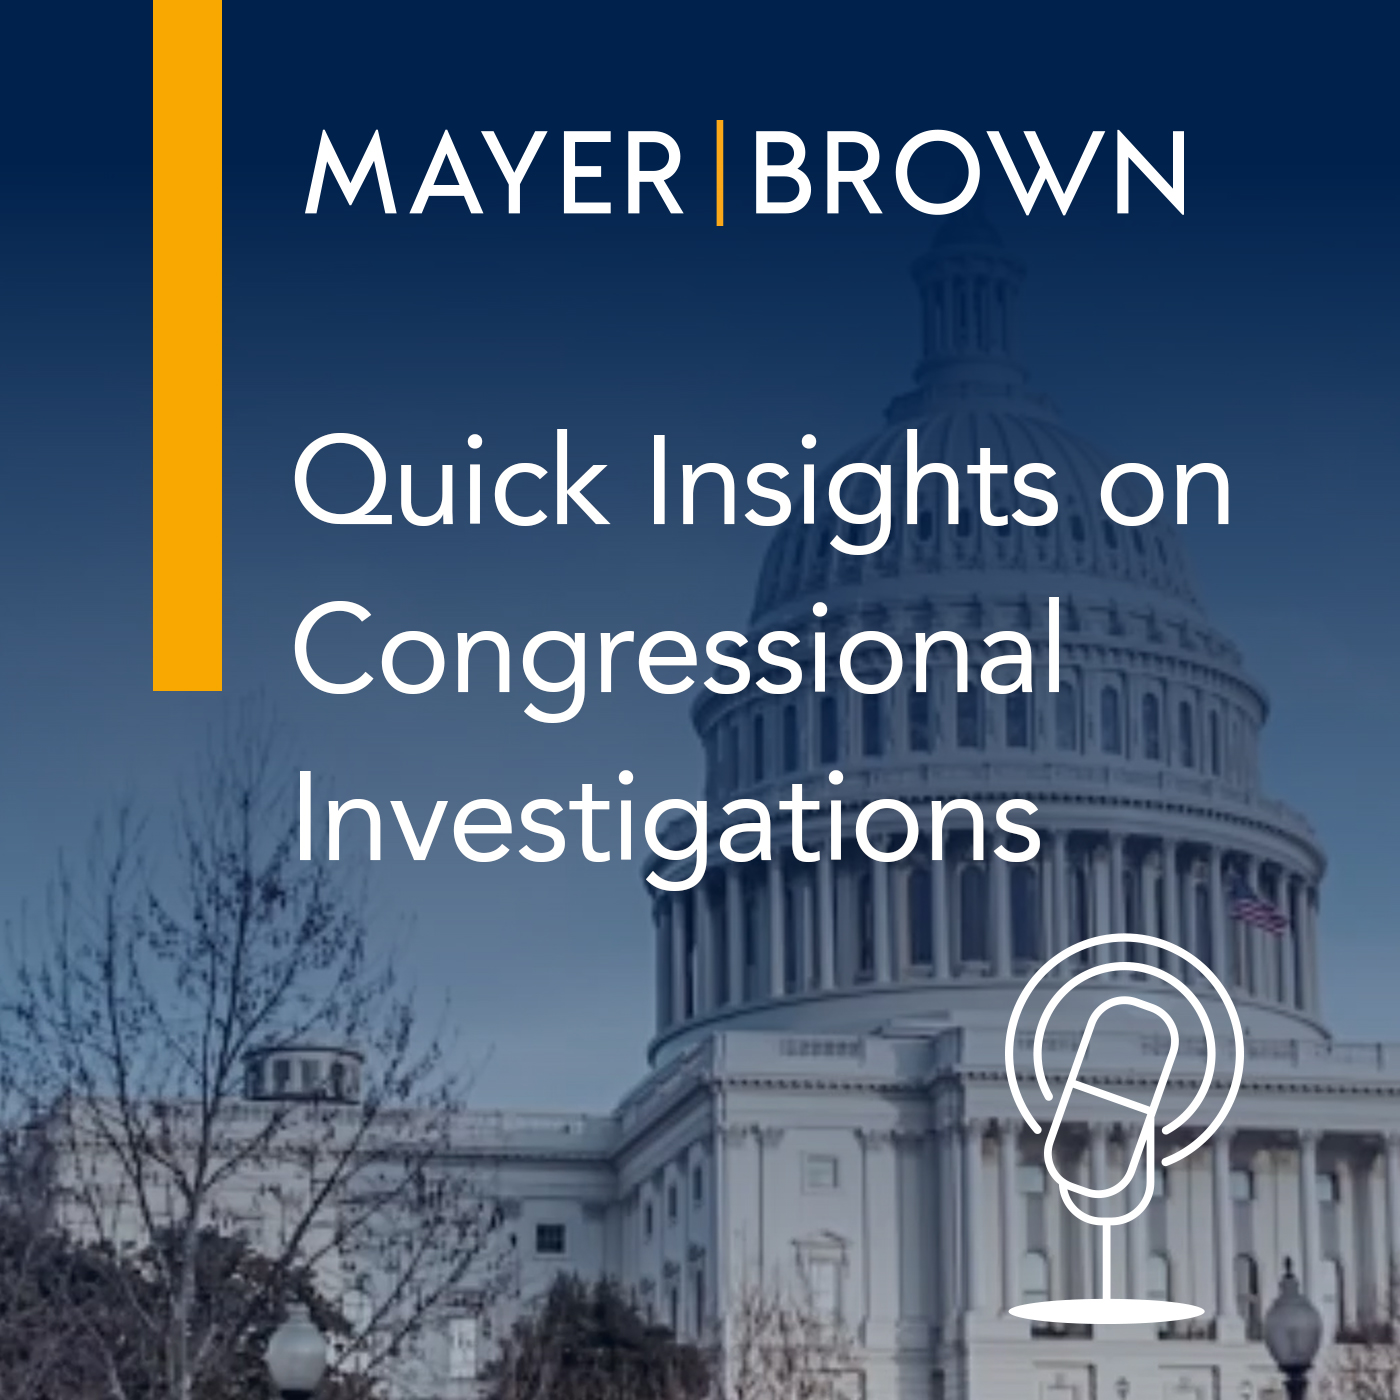 Quick Insights on Congressional Investigations